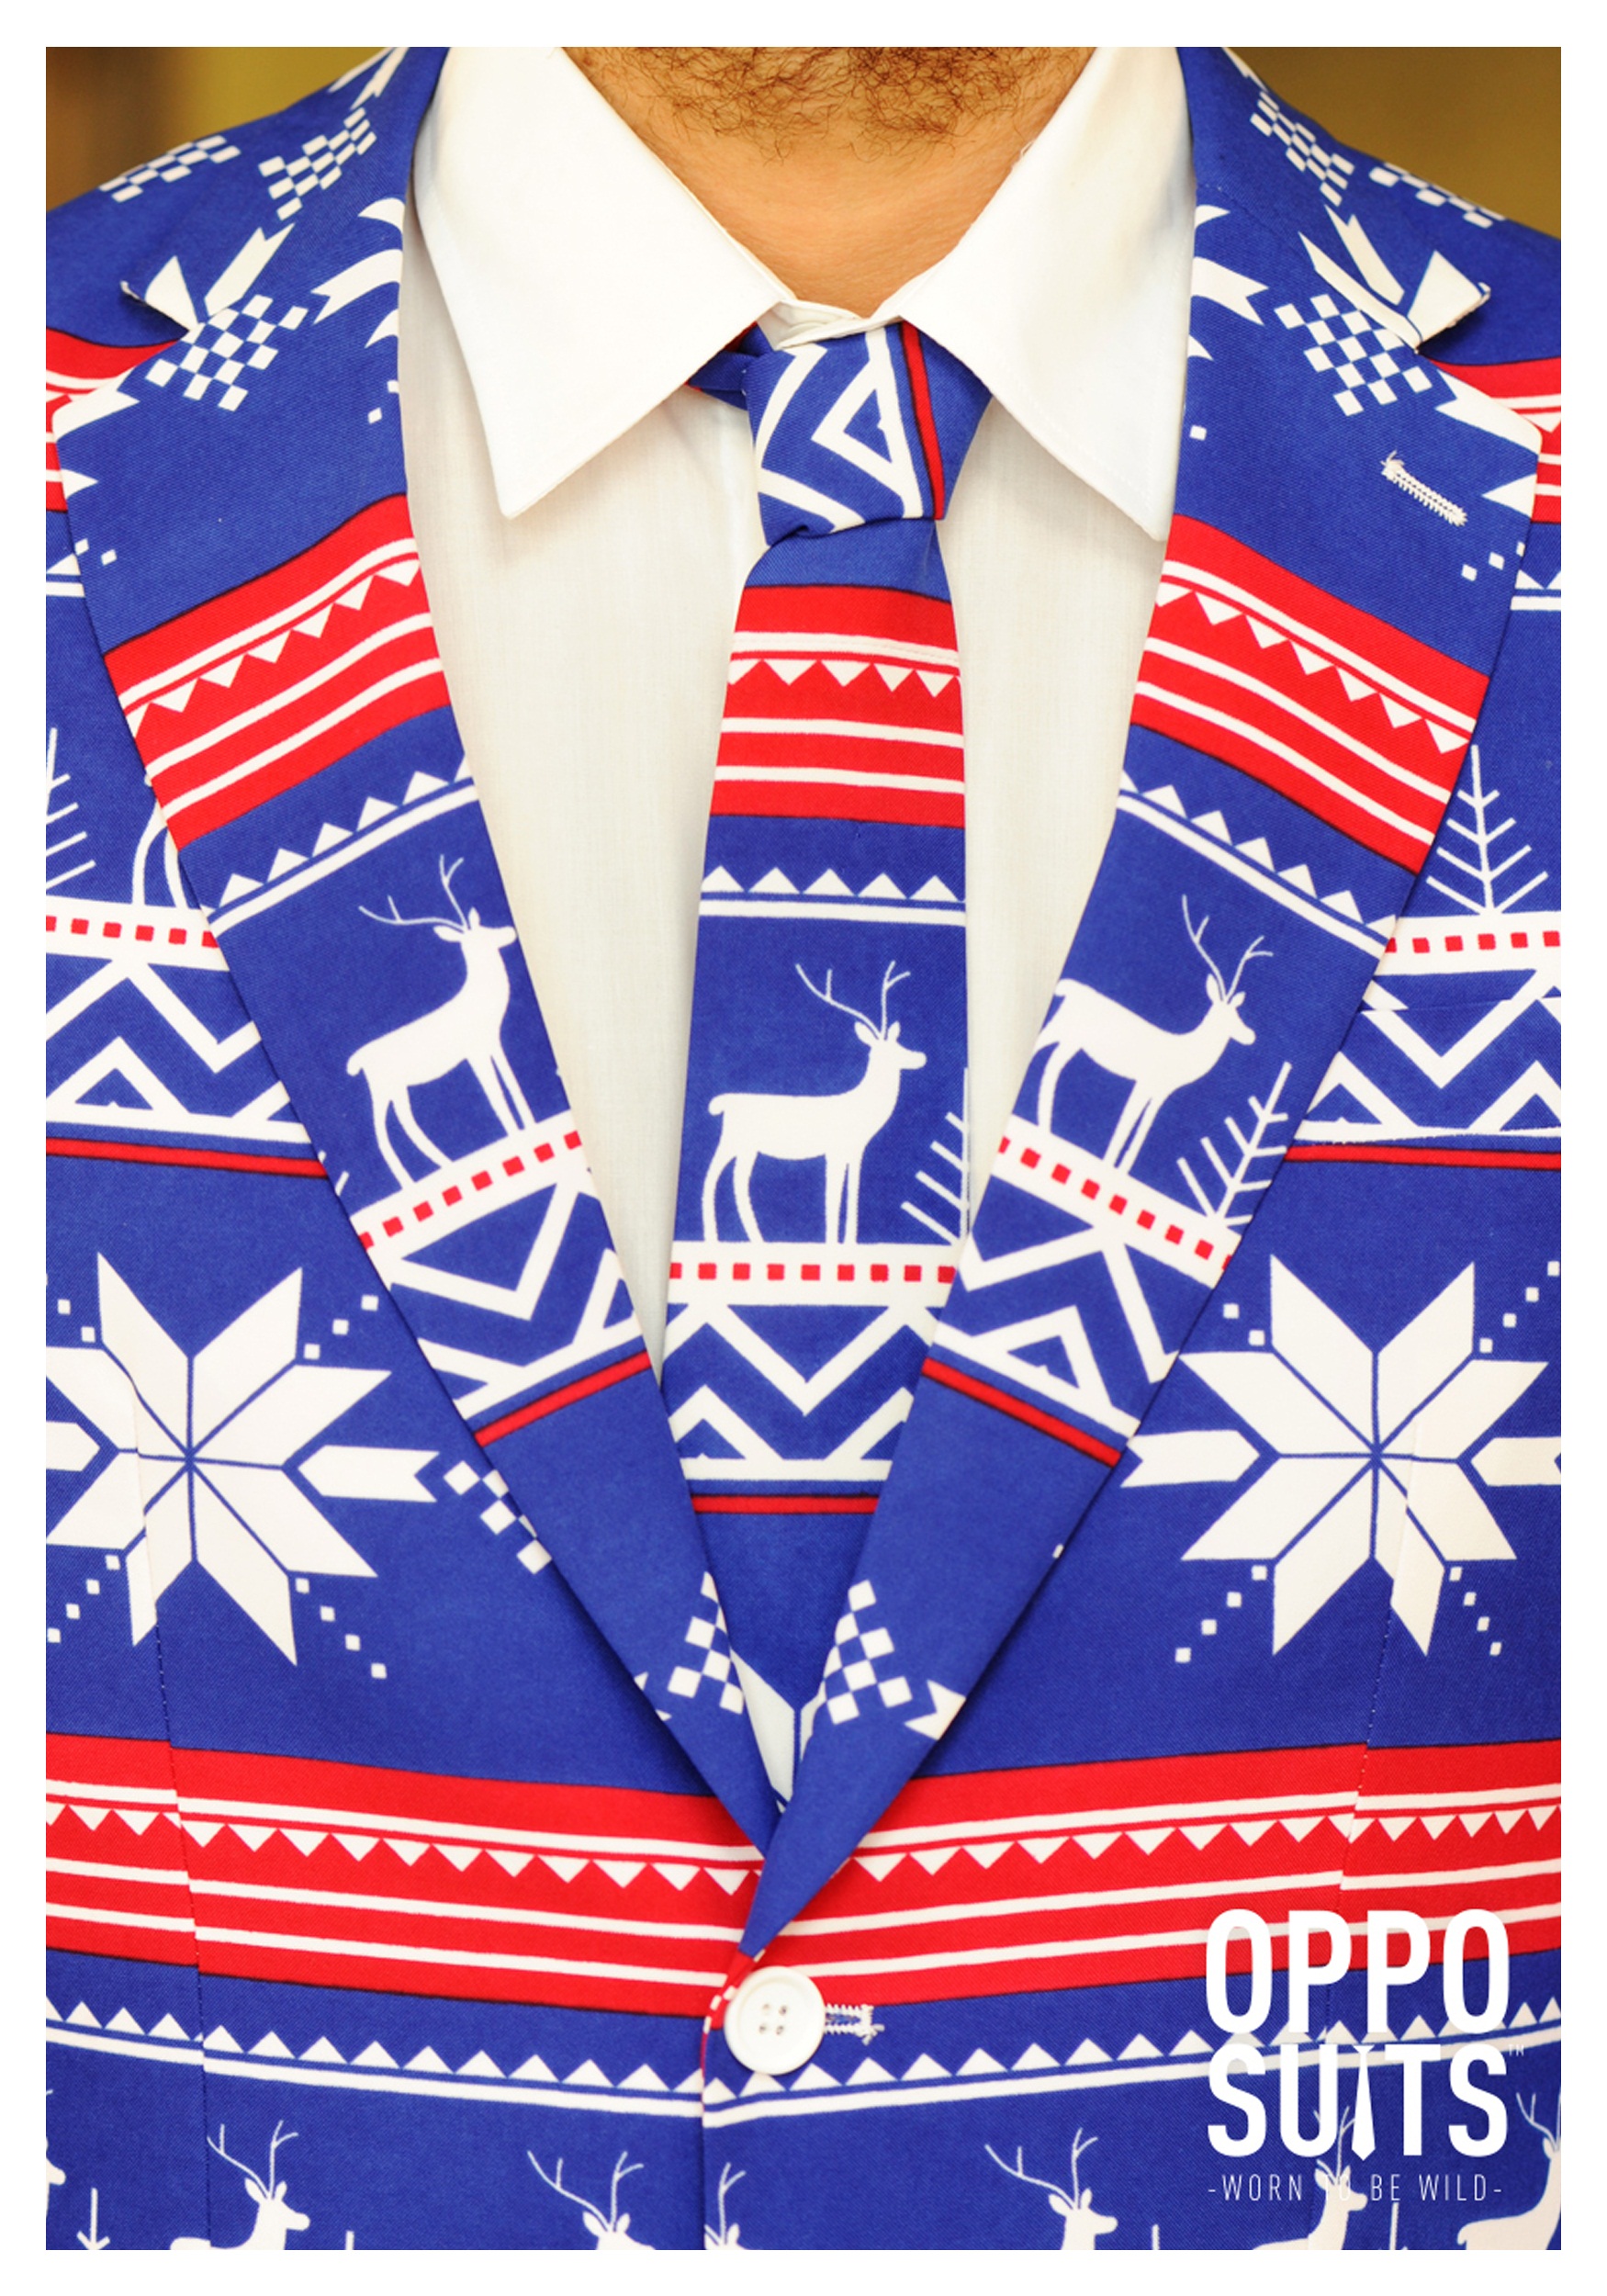 Men's Ugly Christmas Sweater Suit OppoSuits Costume